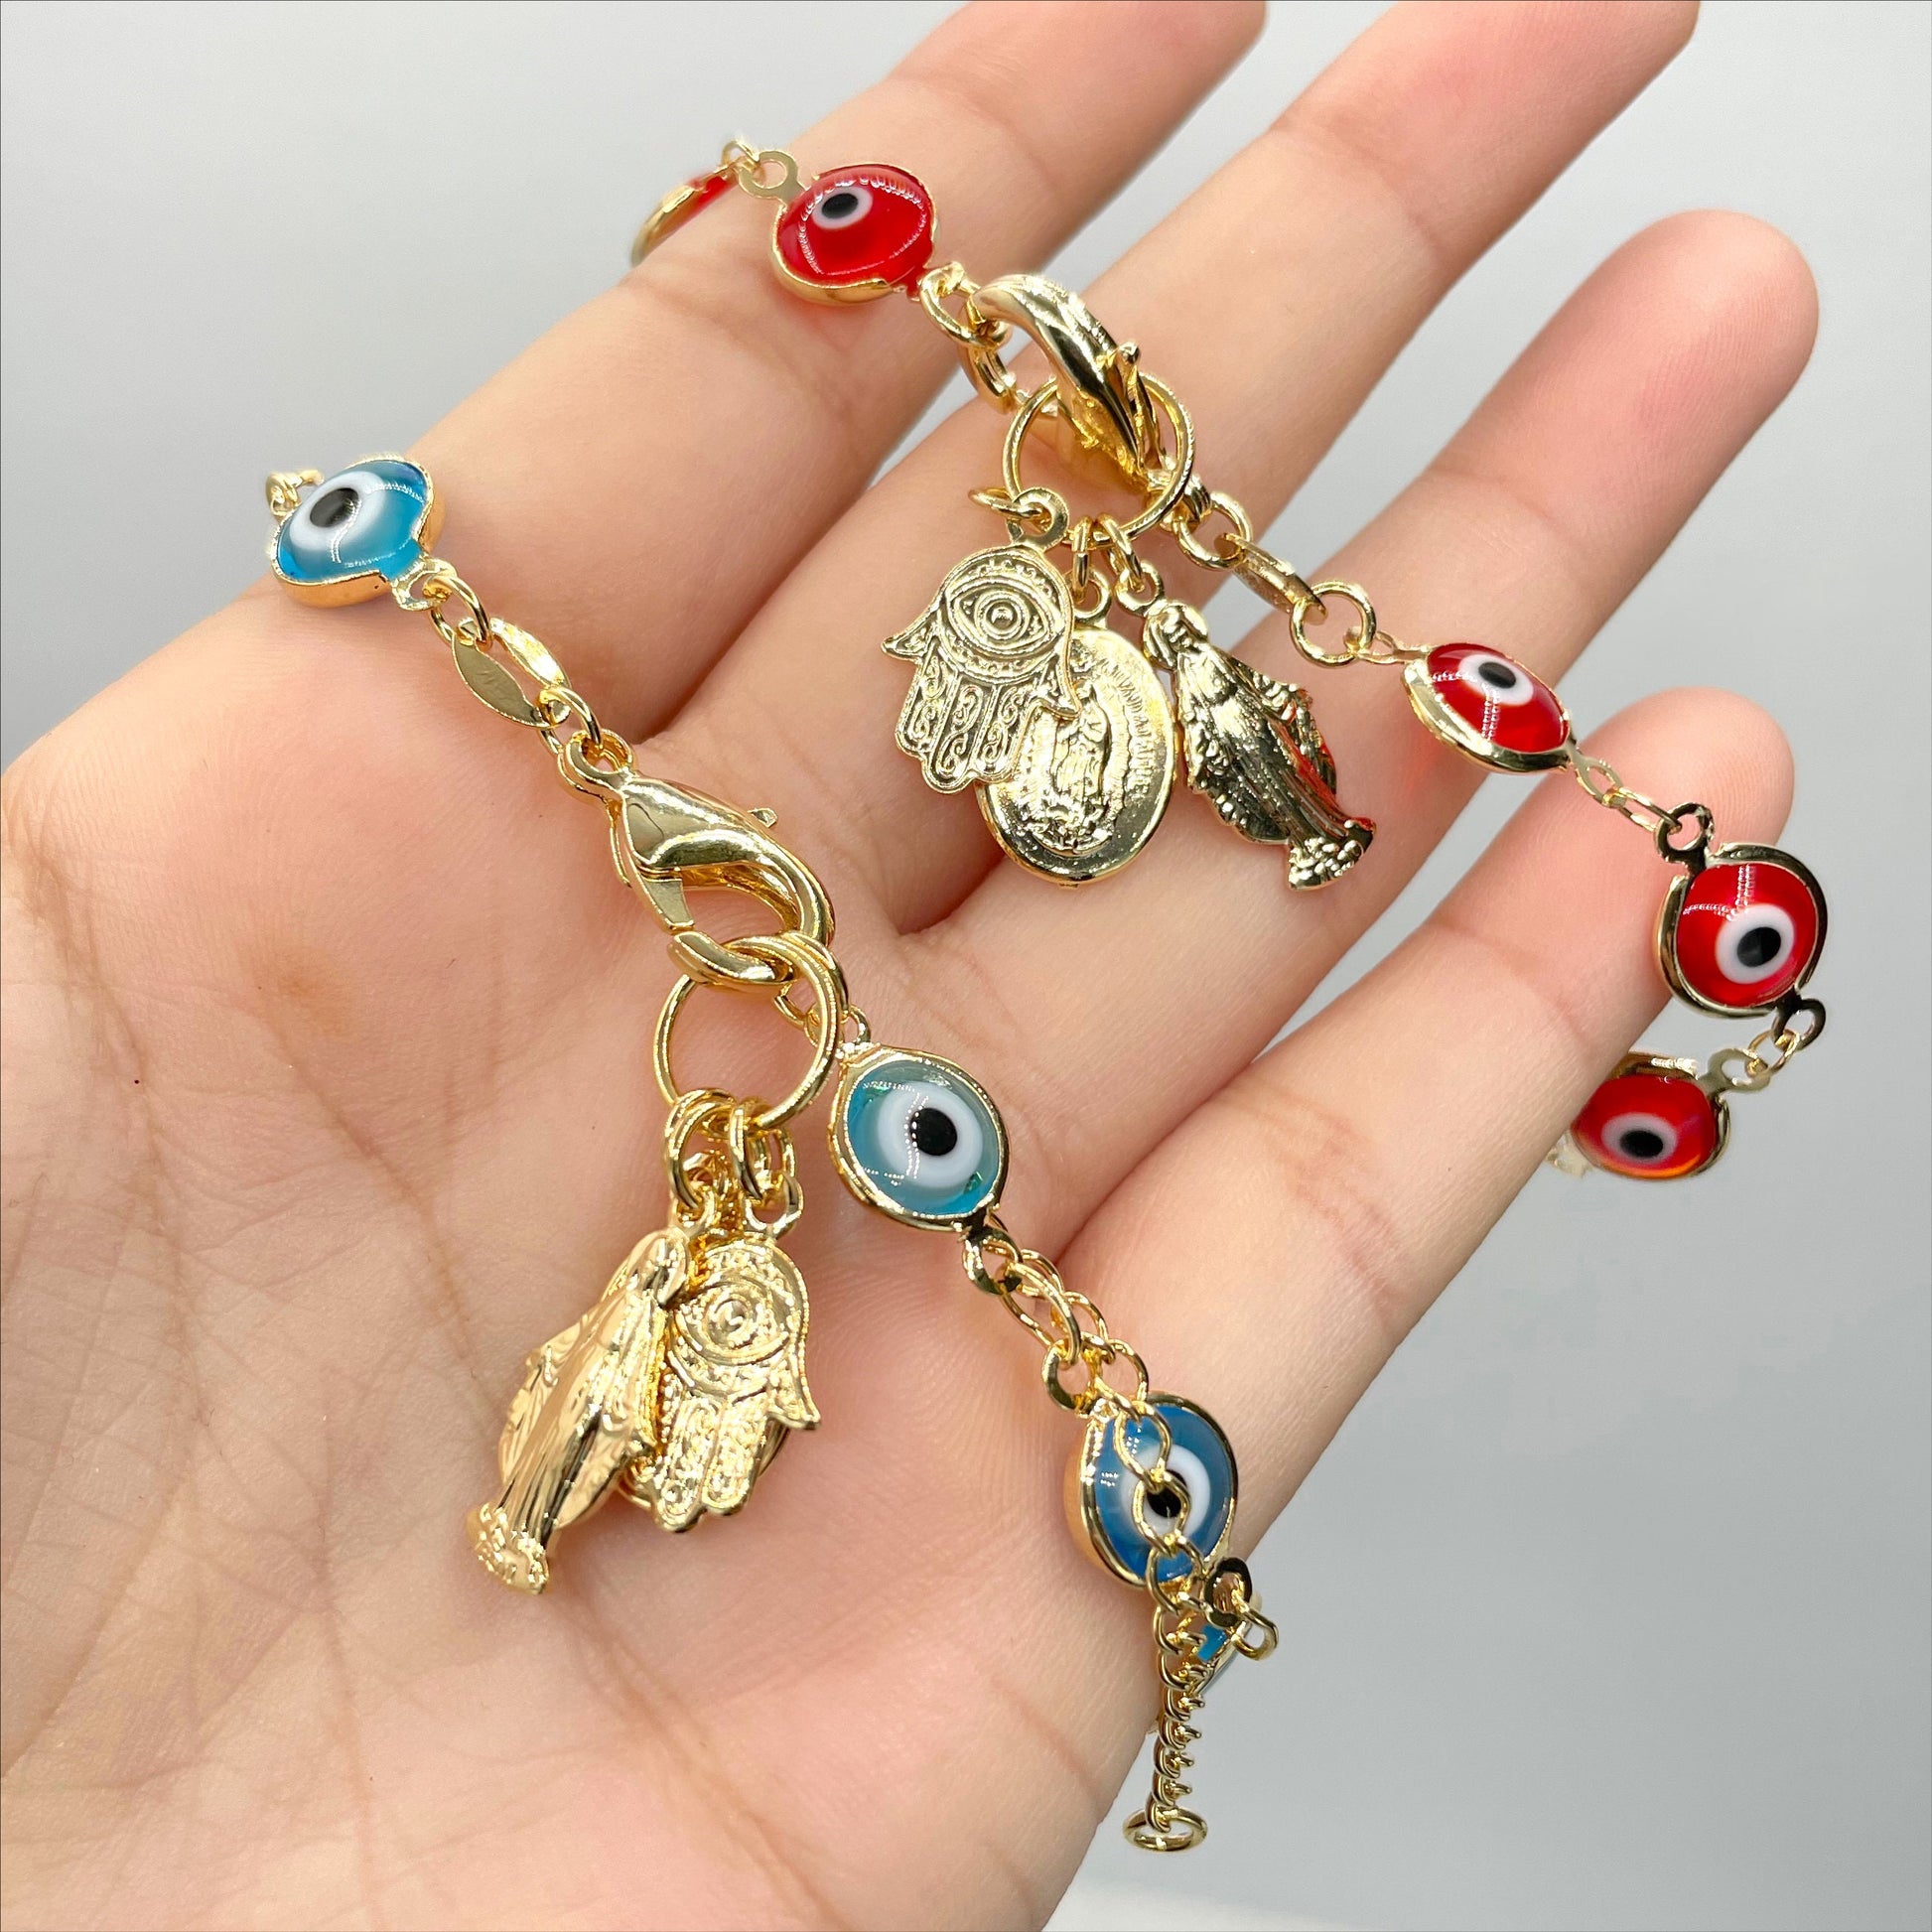 18k Gold Filled Red or Blue Evil Eyes Linked with Hamsa Hand, La Milagrosa, Virgen Guadalupe Charms Wholesale Jewelry Making Supplies